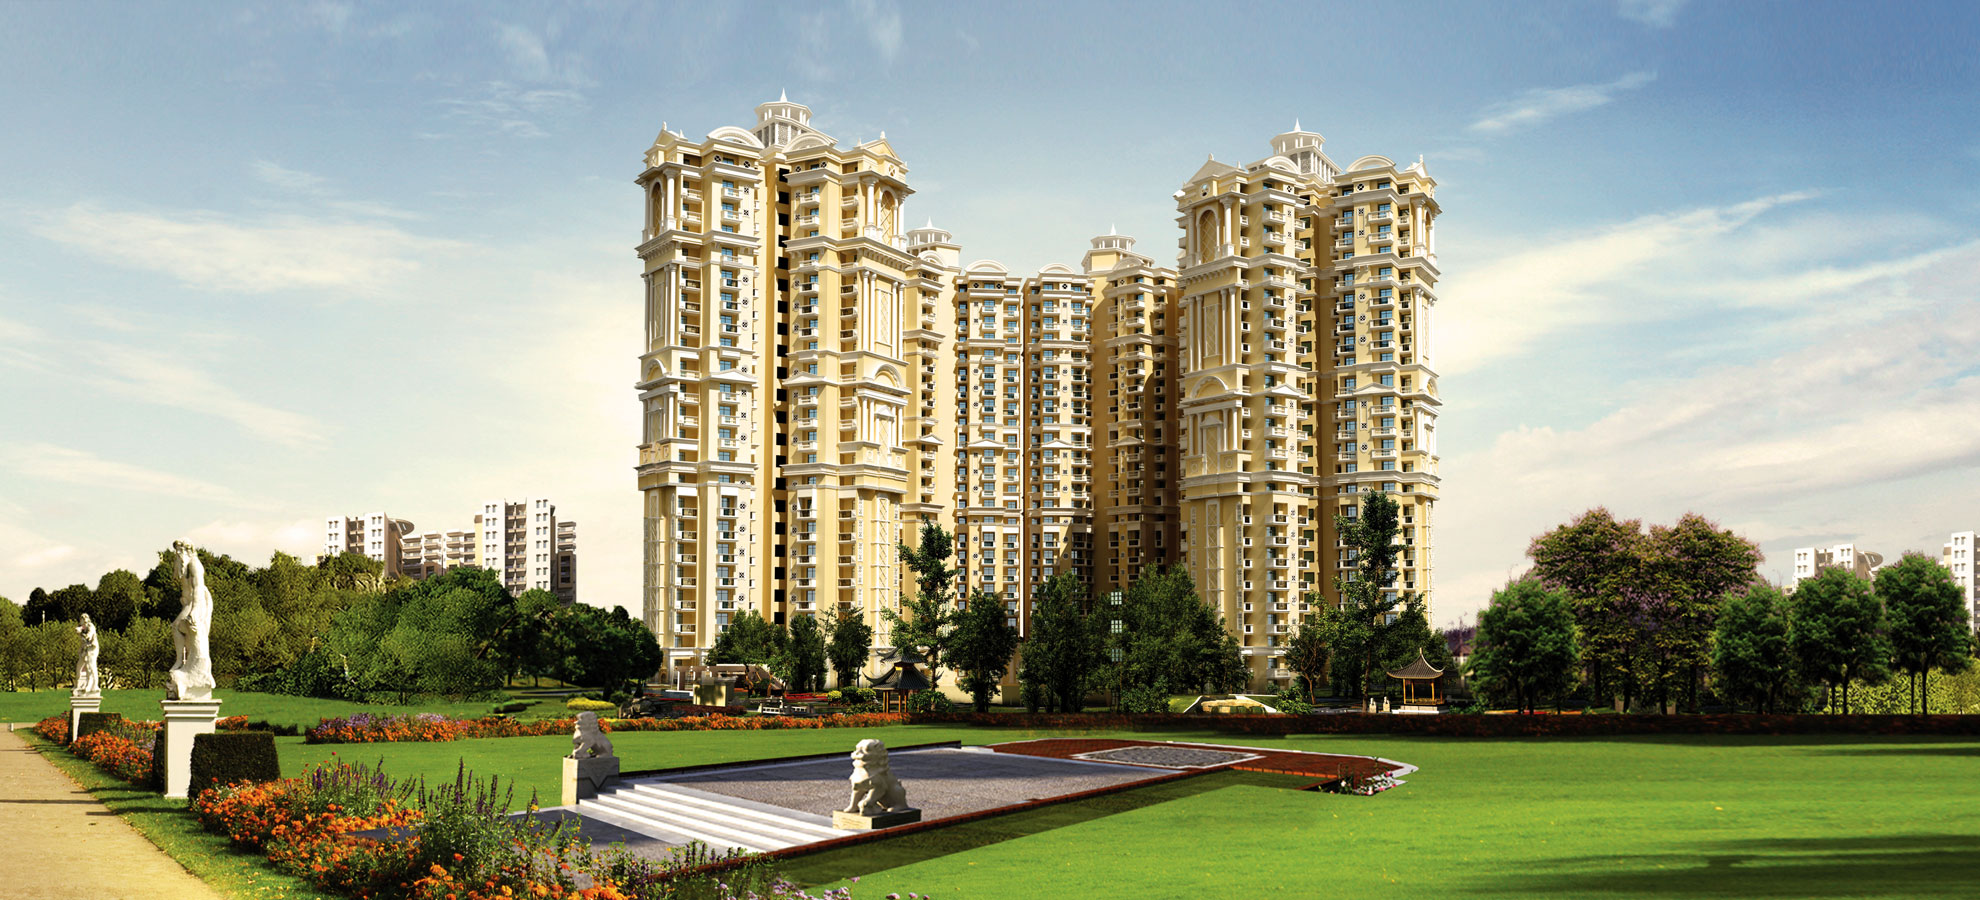 Supertech The Romano has been designed on classical Roman Architecture ensuring all world class advanced amenities Update